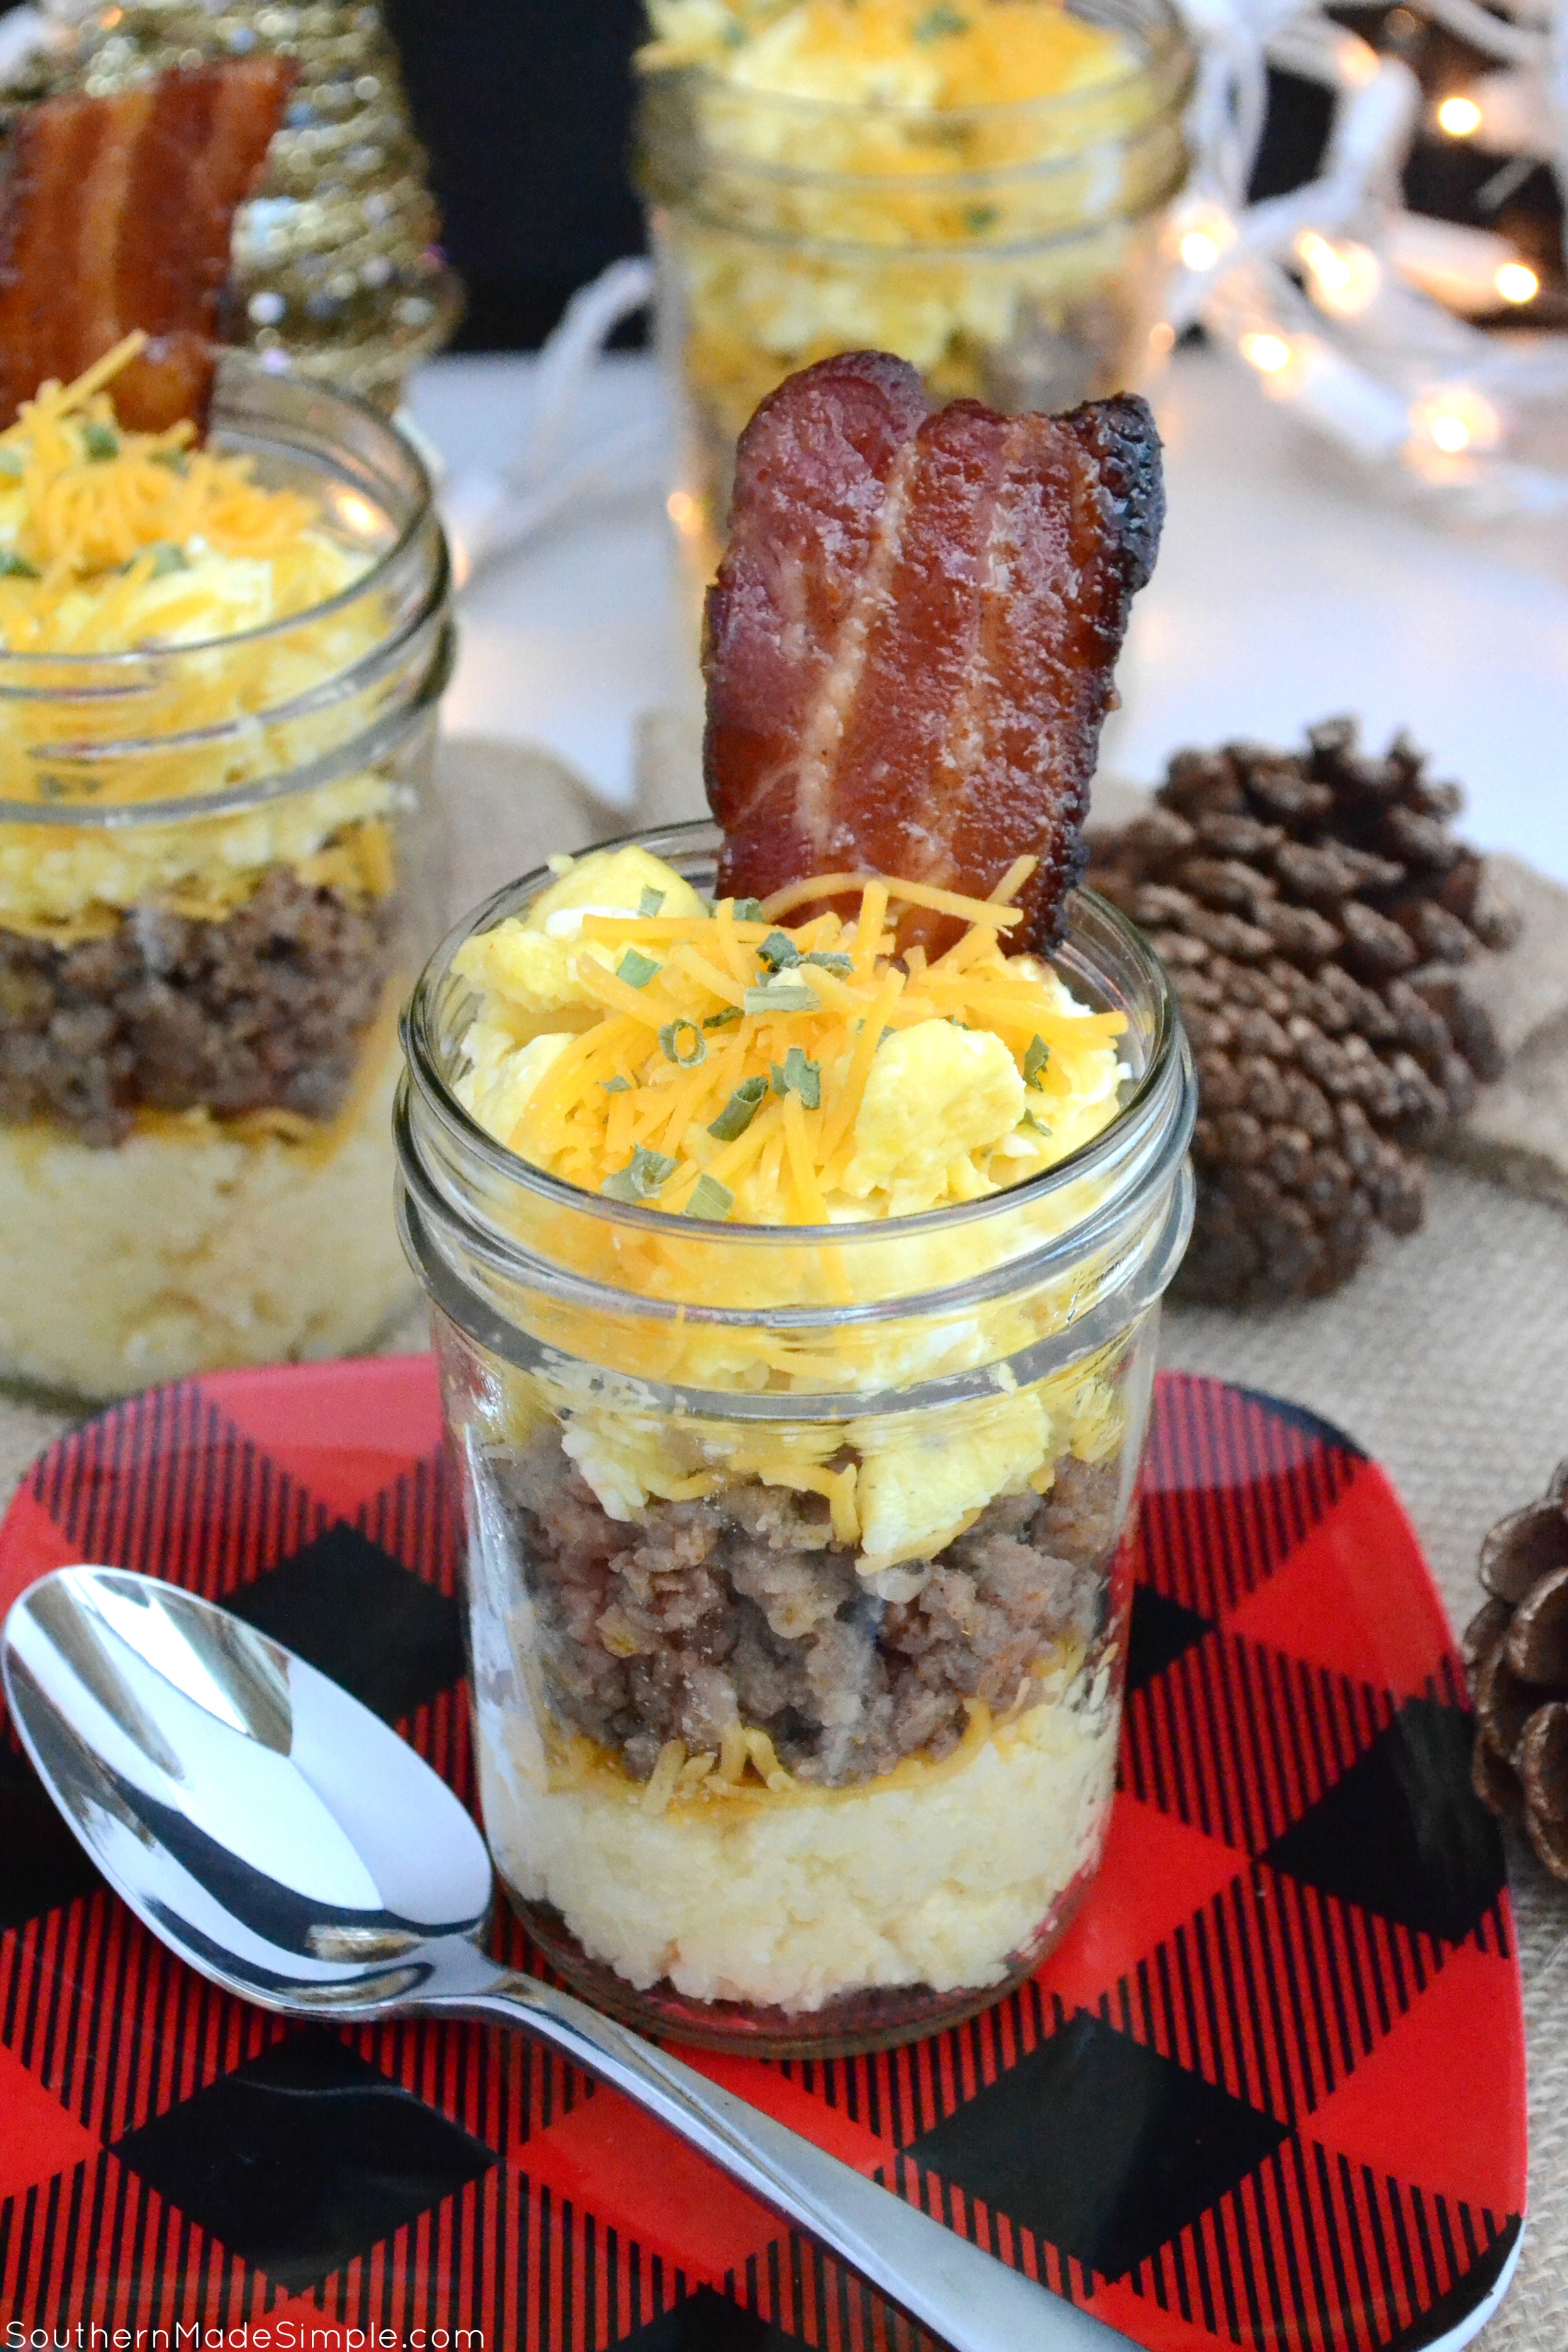 Fixing a feast for friends and family during the holidays? Let them dig in to these delicious Mini Ultimate Breakfast Trifles made with cheese grits, scrambled eggs and scrambled Jimmy Dean Pork Sausage! #MadeWithLovePublix #ad